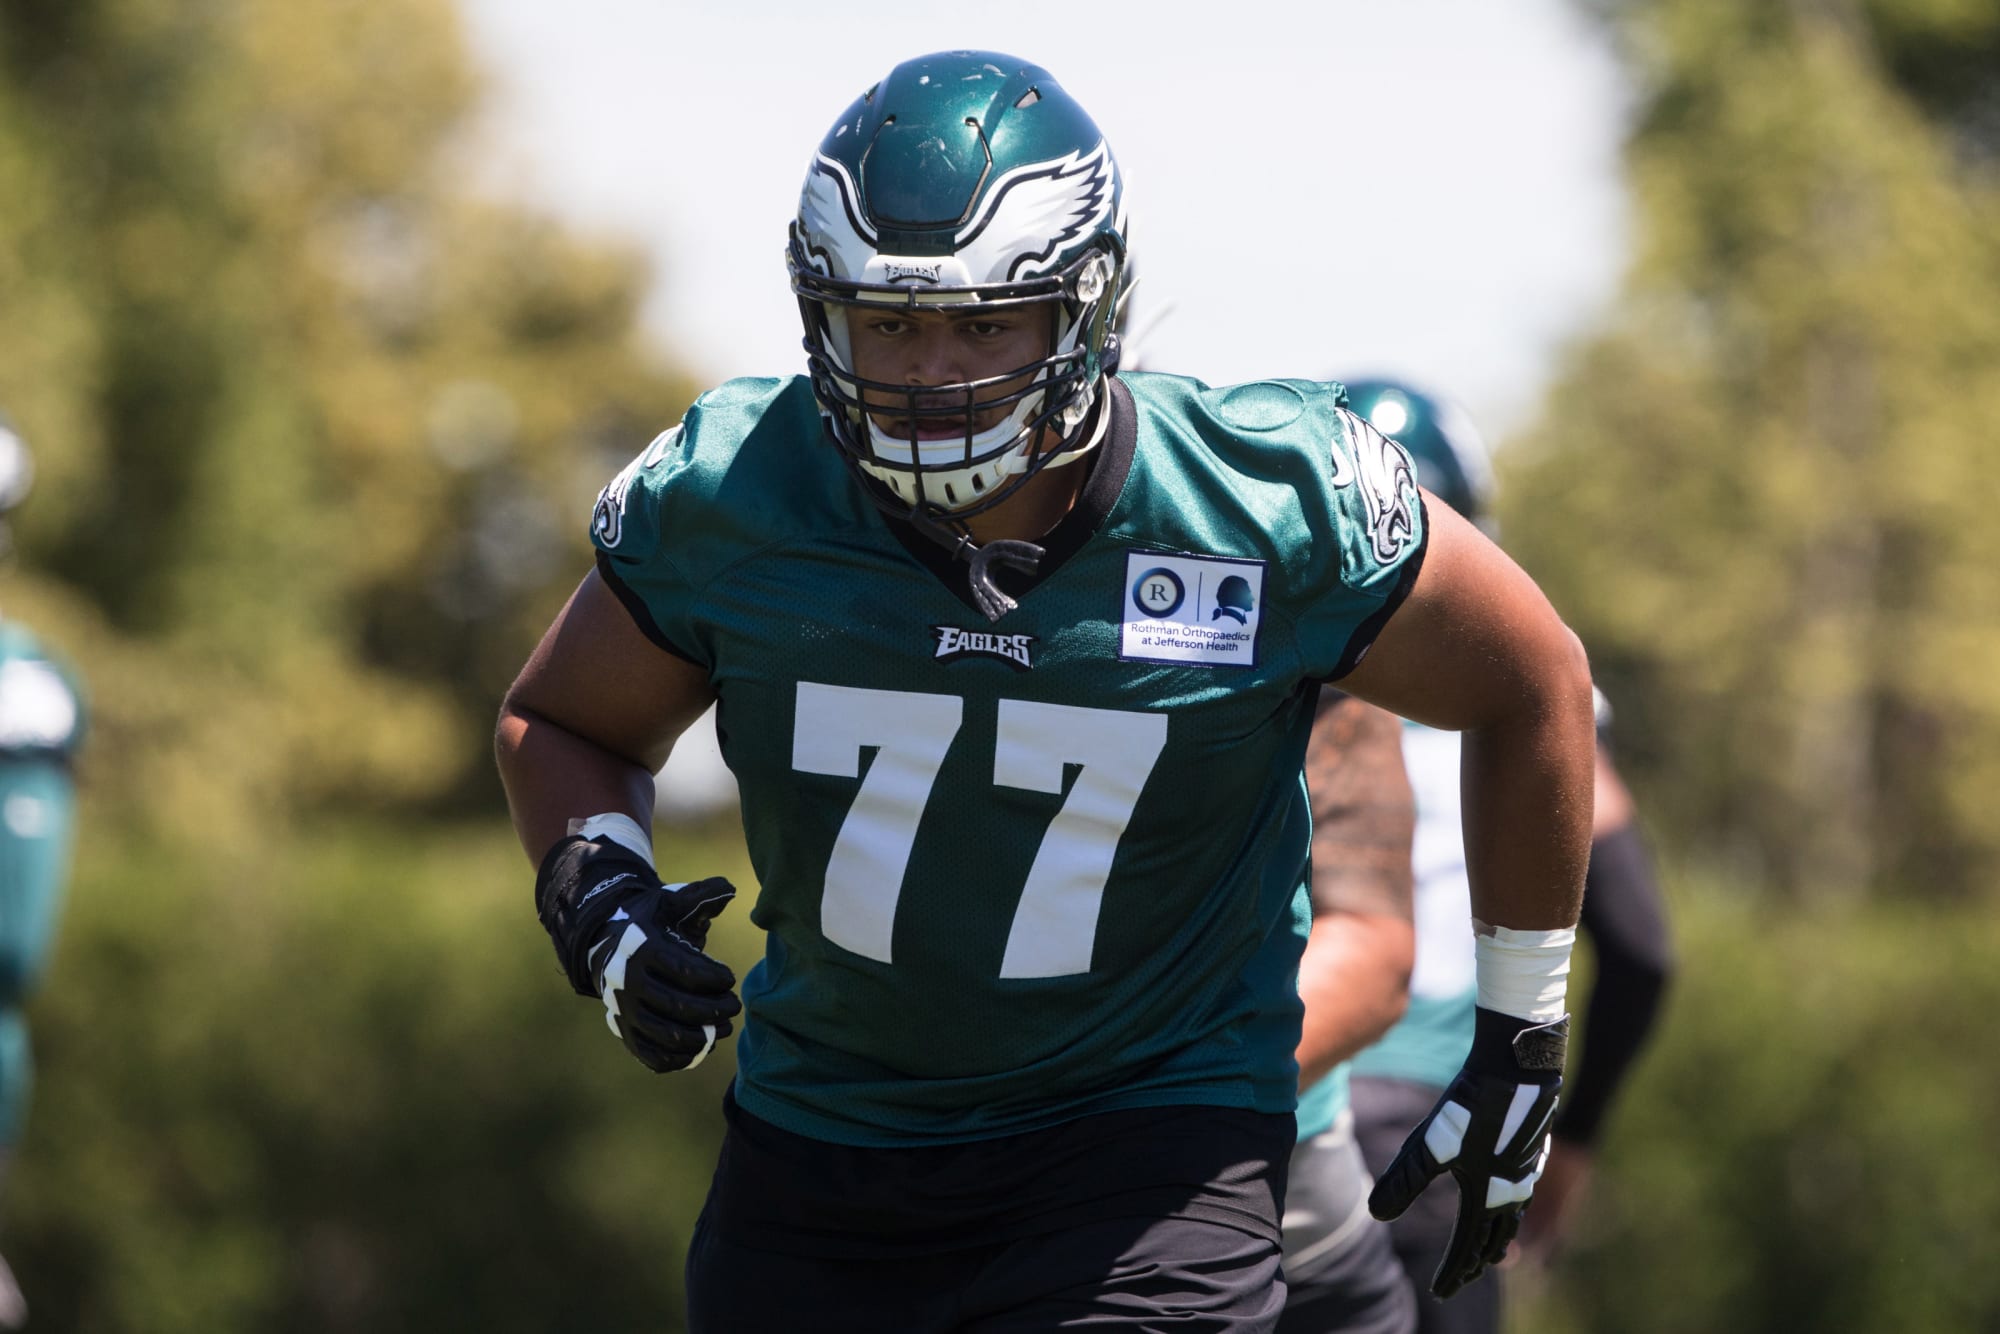 Reasons for Andre Dillard’s early exit from Eagles practice revealed